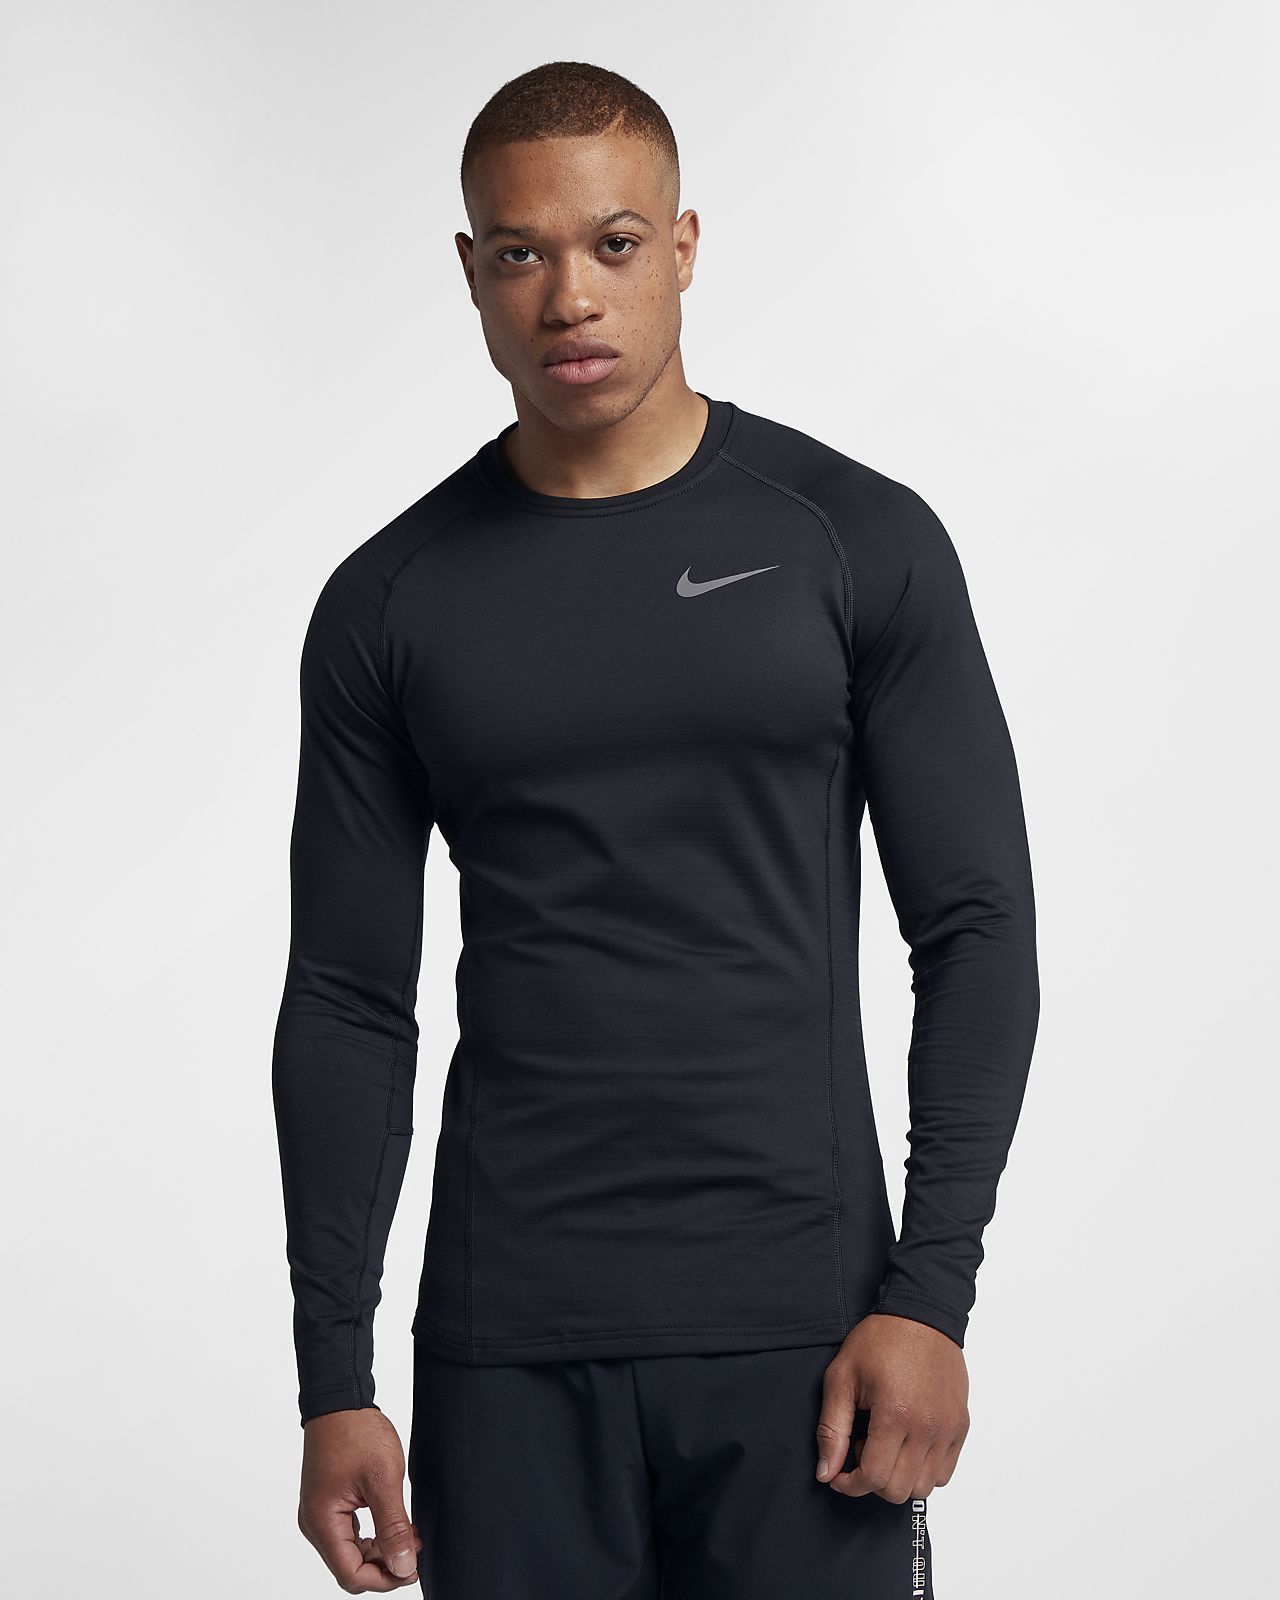 Nike Men's pro Top Compression Long Sleeve Functional Shirt Dri-Fit ...